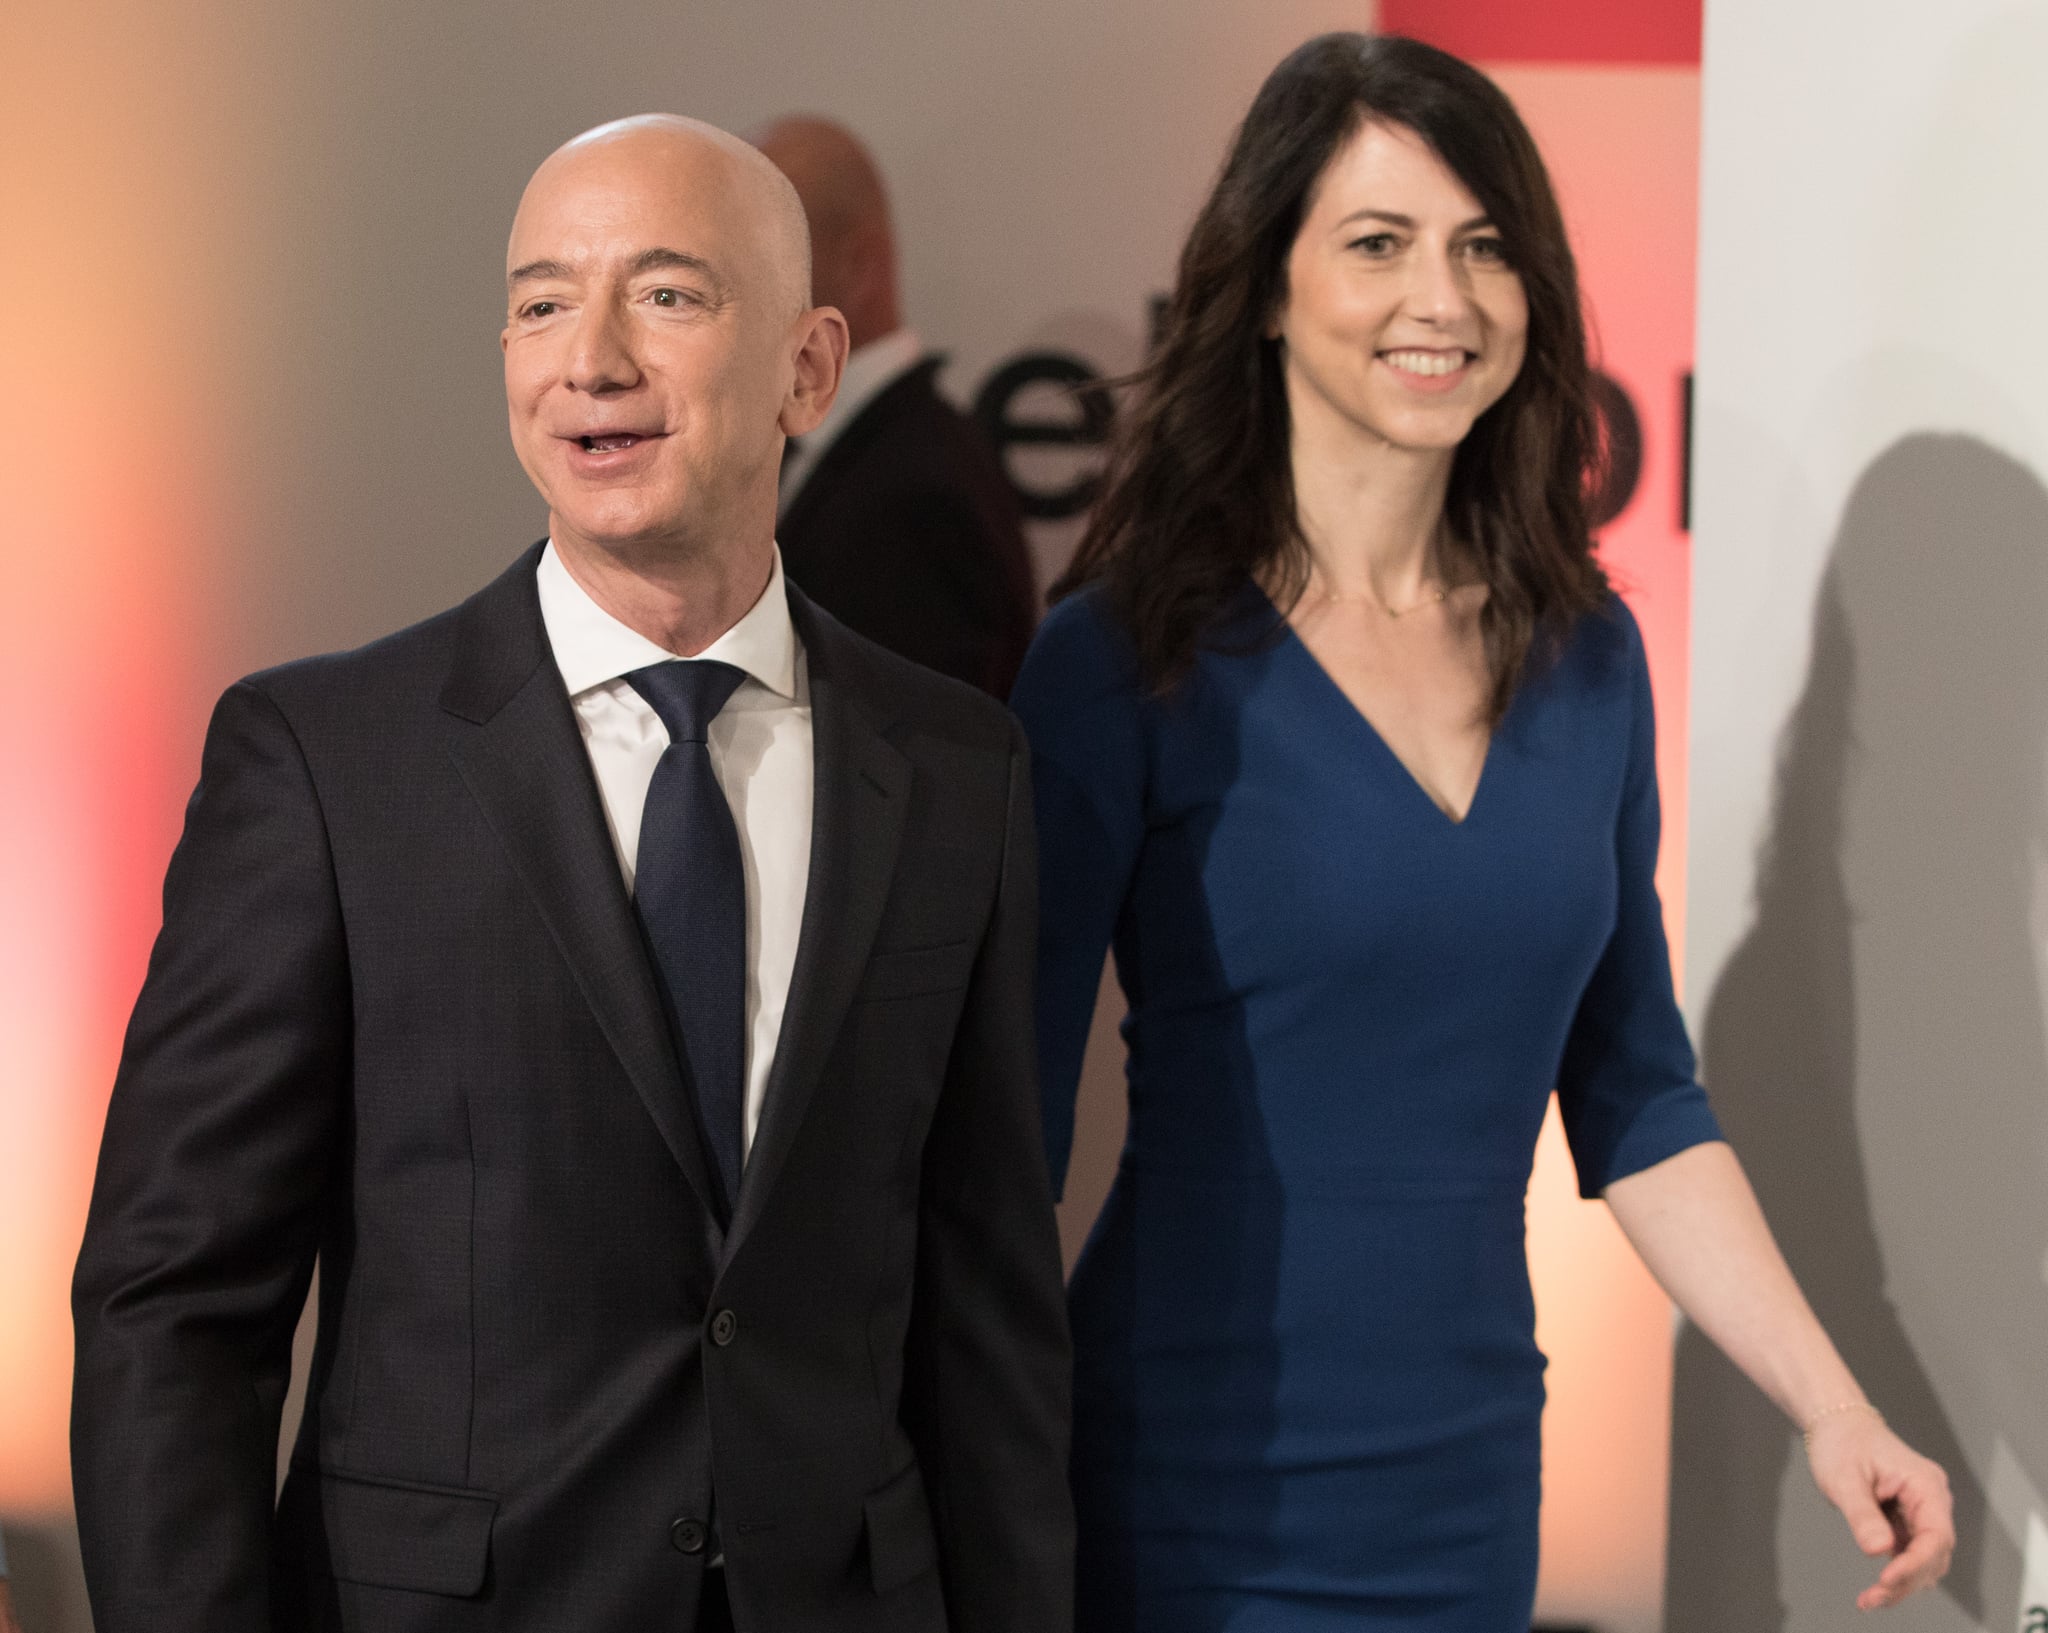 dpatop - 24 April 2018, Germany, Berlin: Head of Amazon Jeff Bezos and his wife MacKenzie Bezos arrive for the Axel Springer award ceremony. Bezos will be receiving the award later. Photo: Jörg Carstensen/dpa (Photo by Jörg Carstensen/picture alliance via Getty Images)